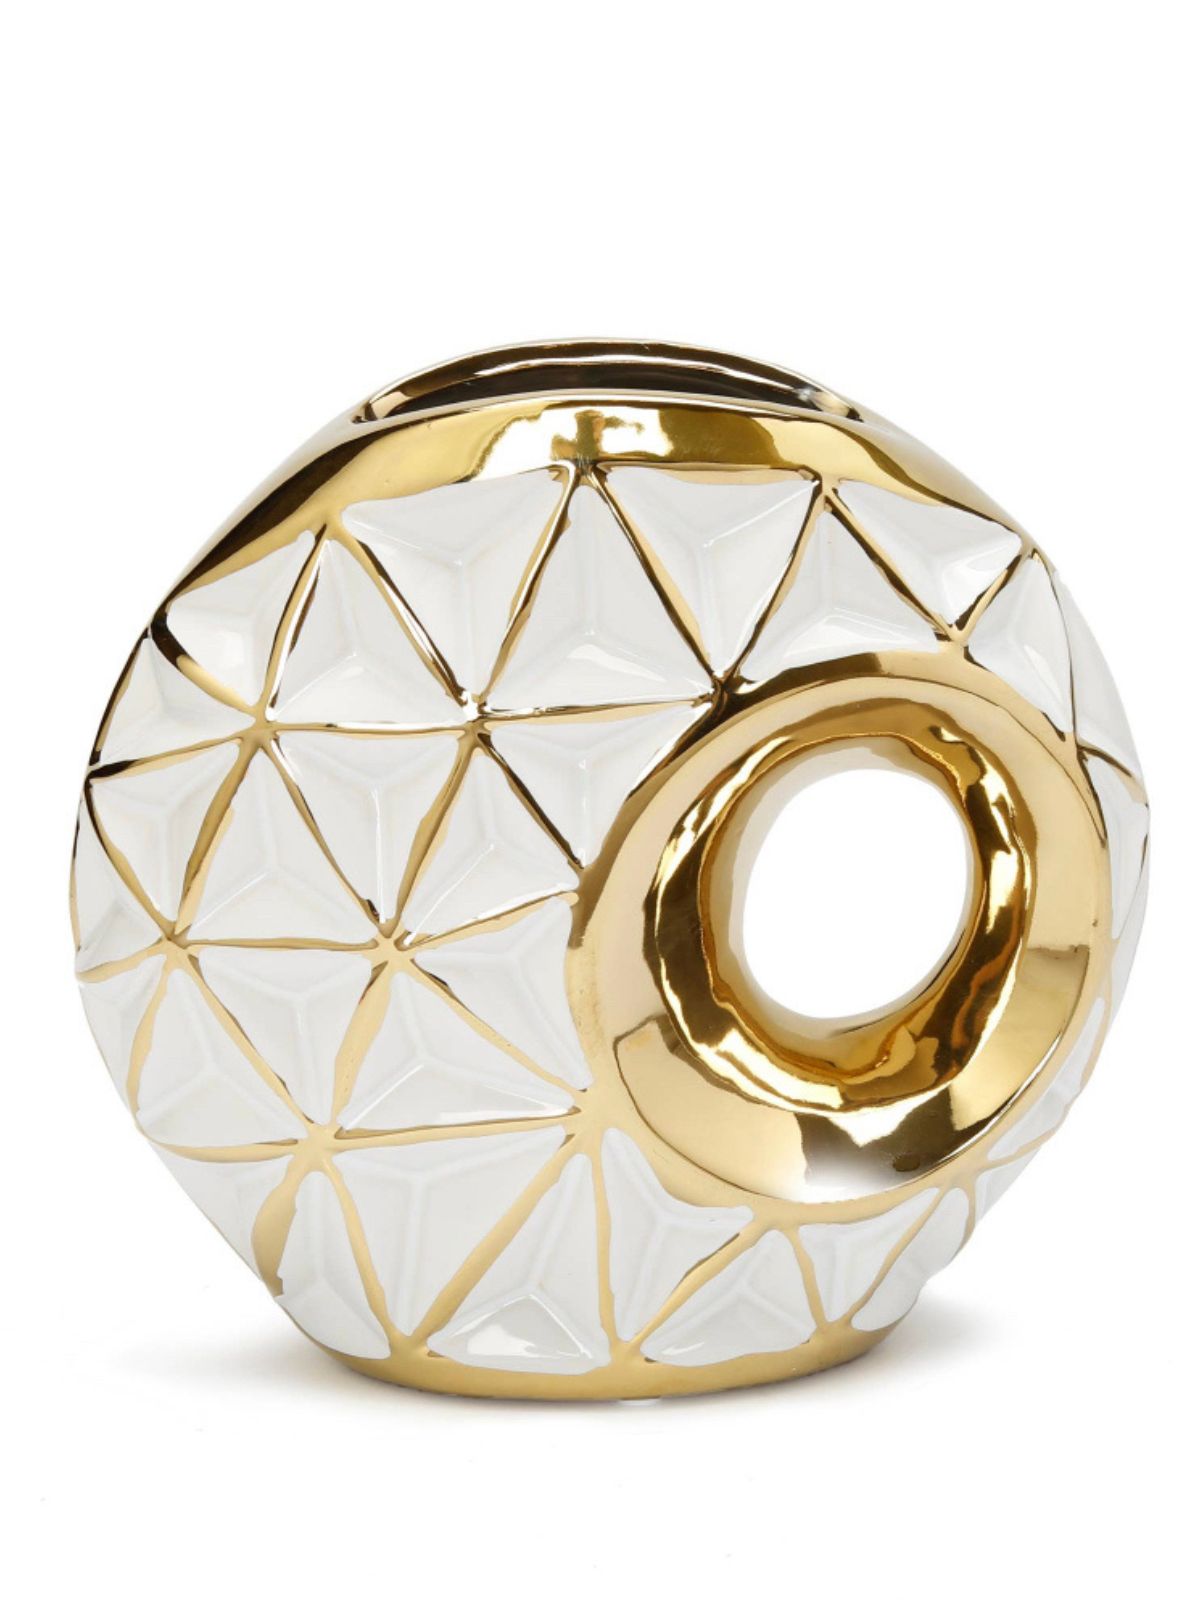 White and Gold Round Decorative Vase with Luxurious Geometric Design - KYA Home Decor